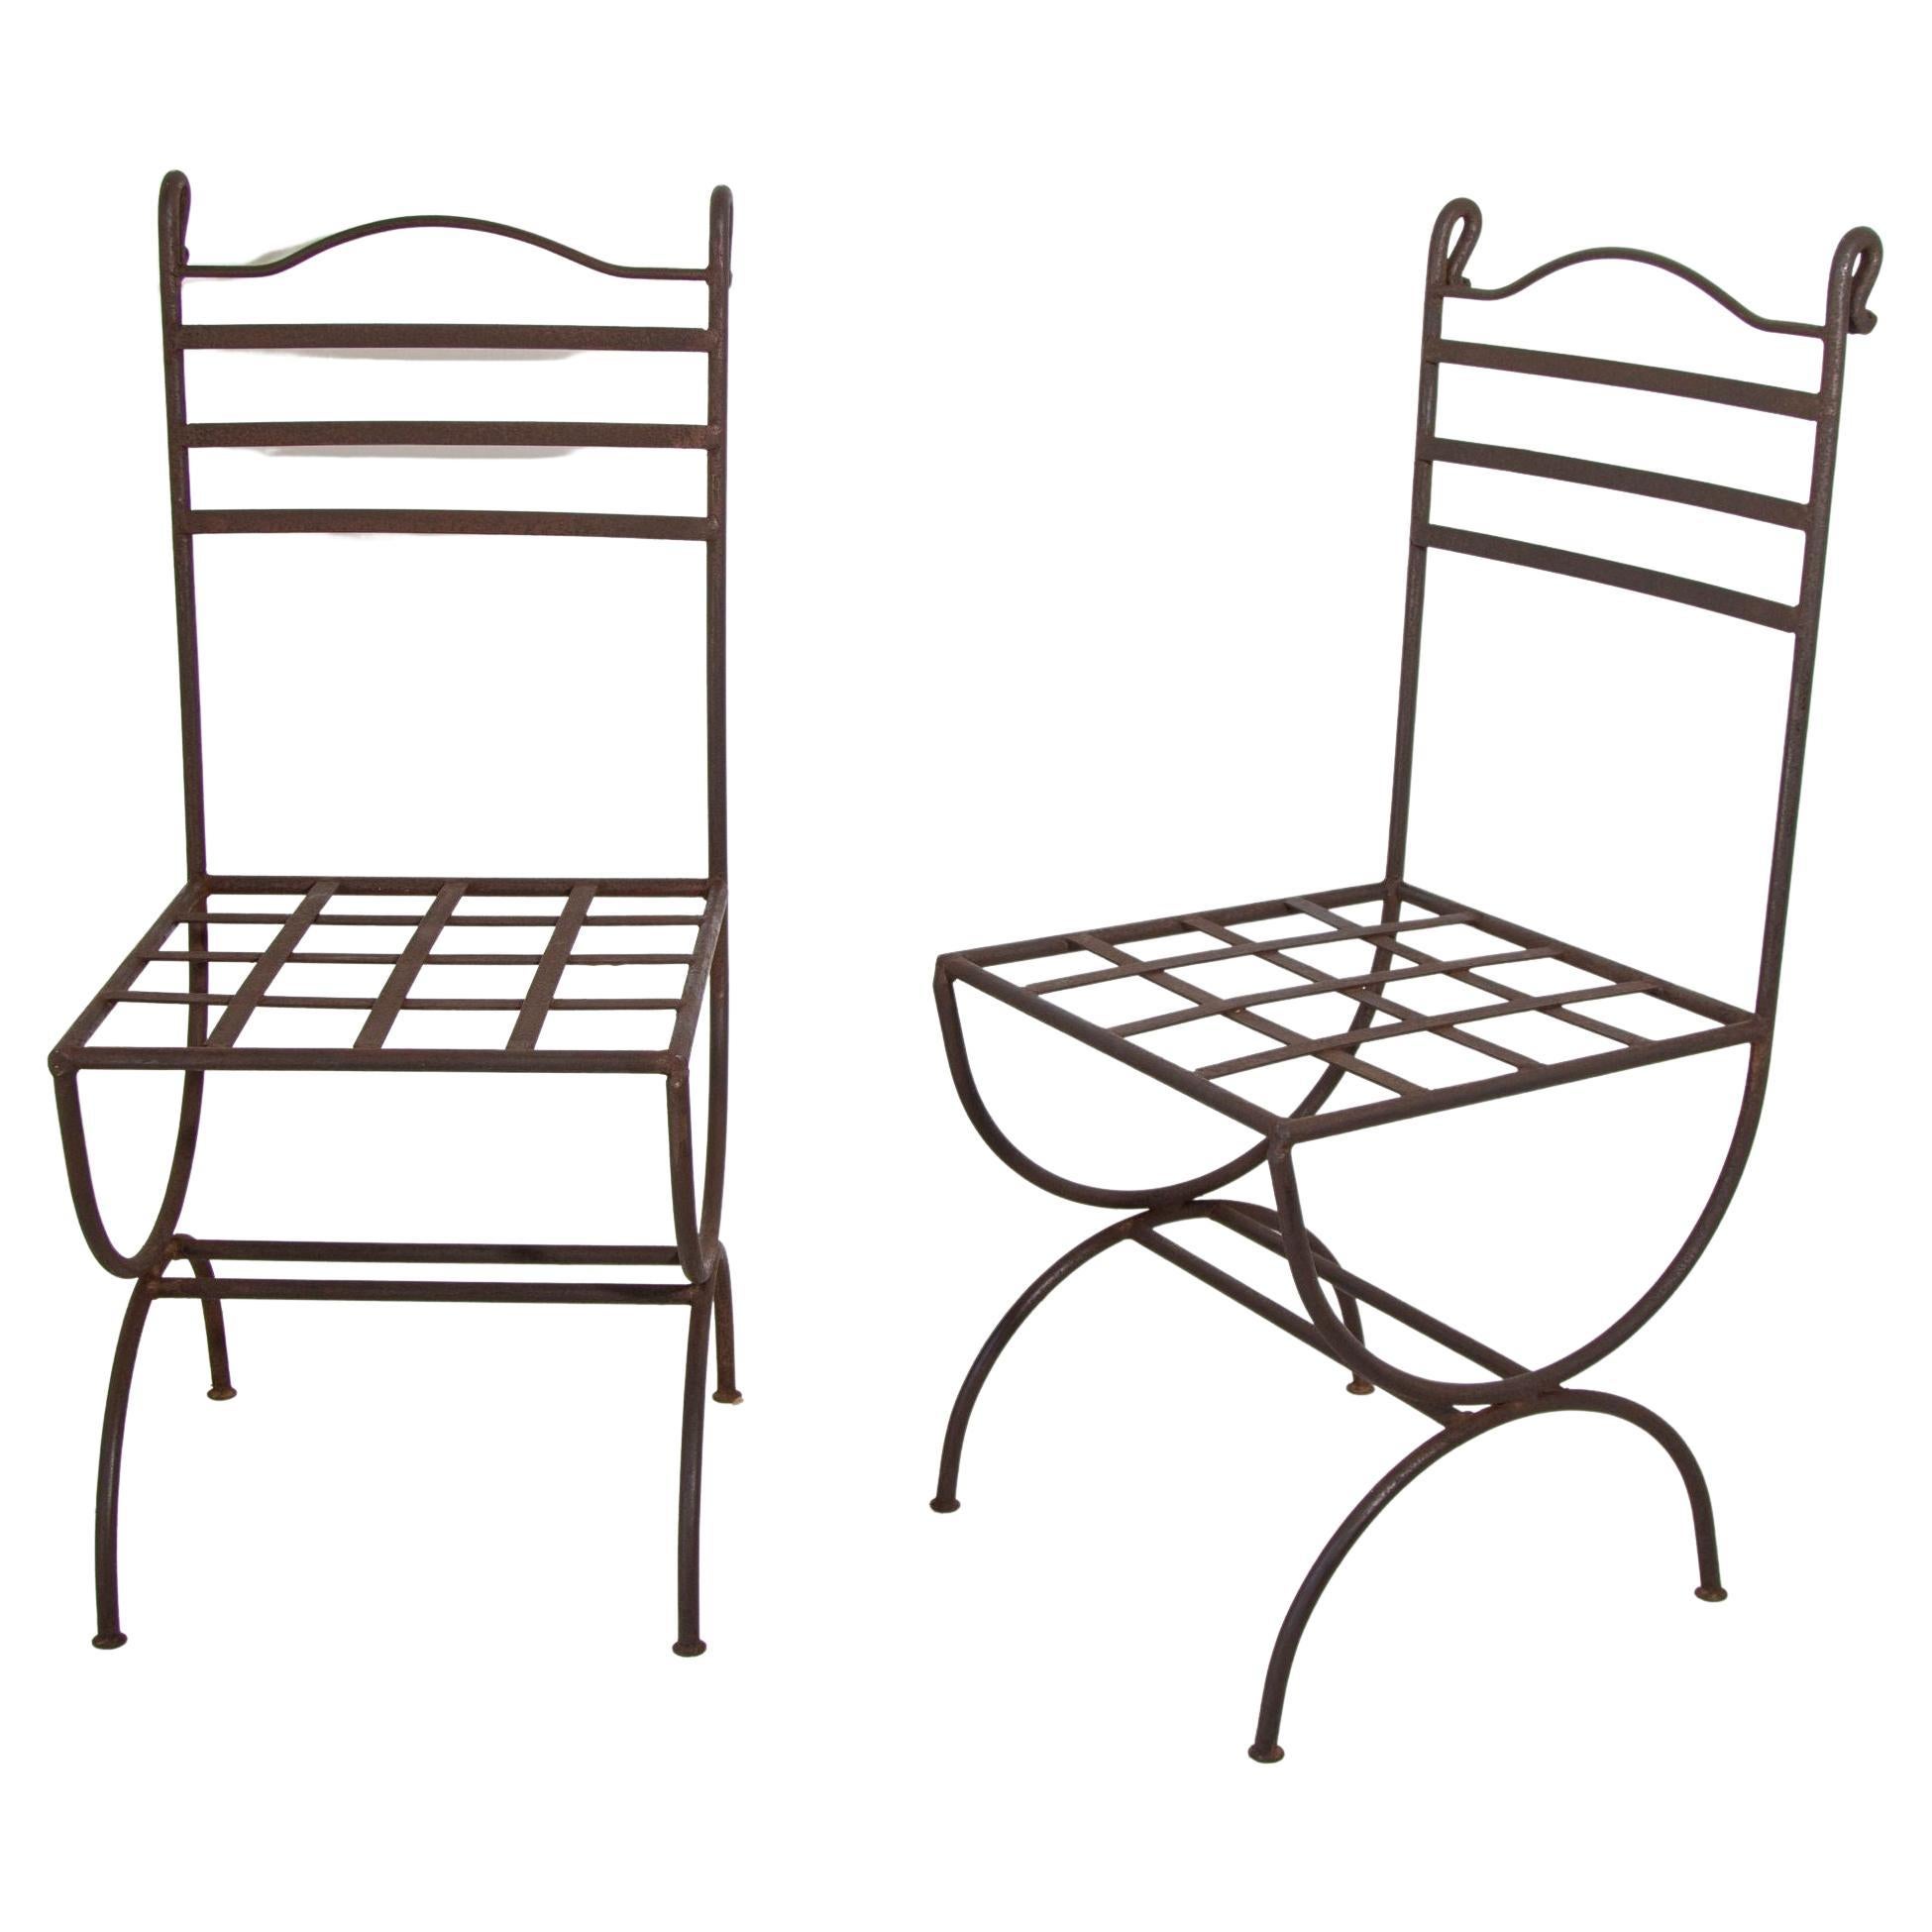 Outdoor Hand Forged Wrought-Iron Chairs French Provincial Style